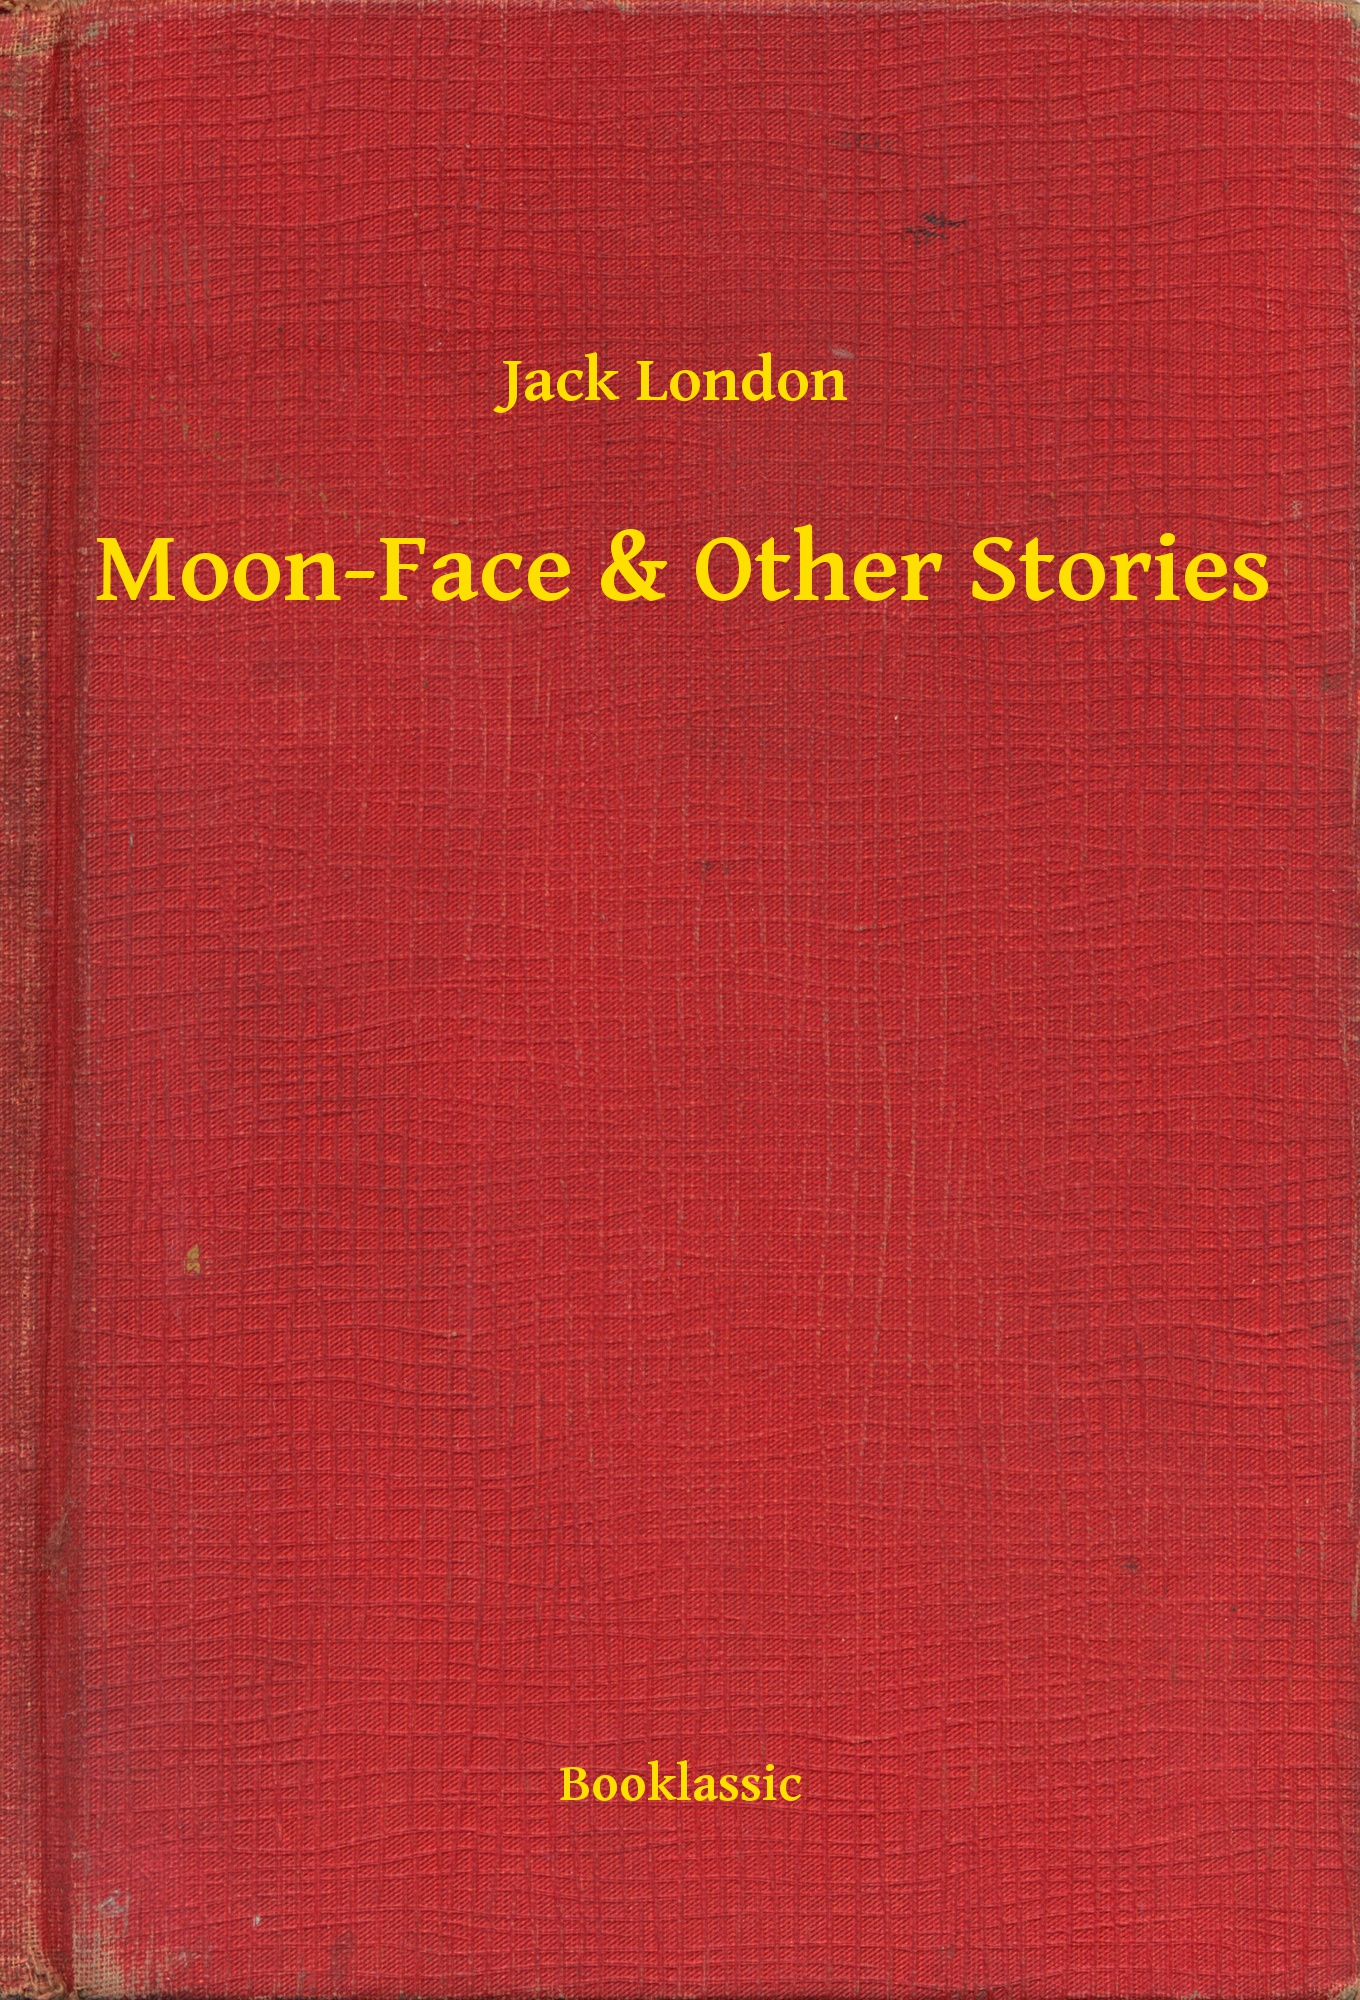 Moon-Face & Other Stories